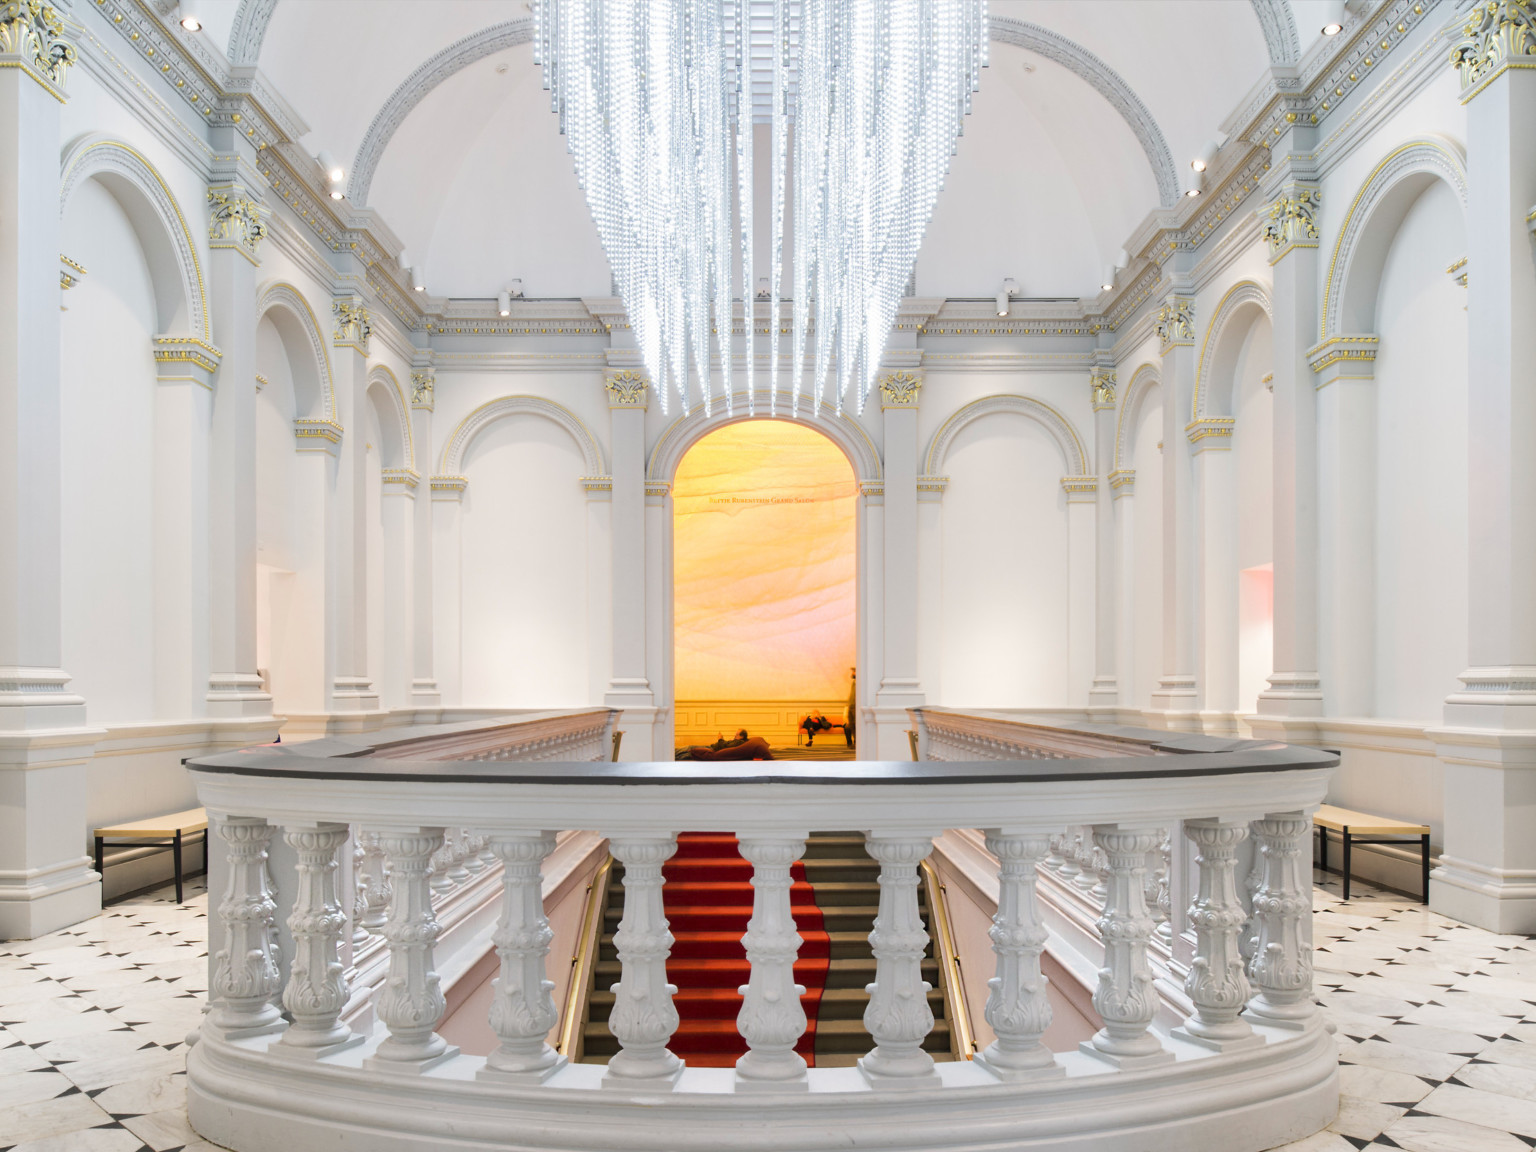 Custom sculptural chandelier hanging above staircase in white room at Renwick Gallery, banister with dark accent in front